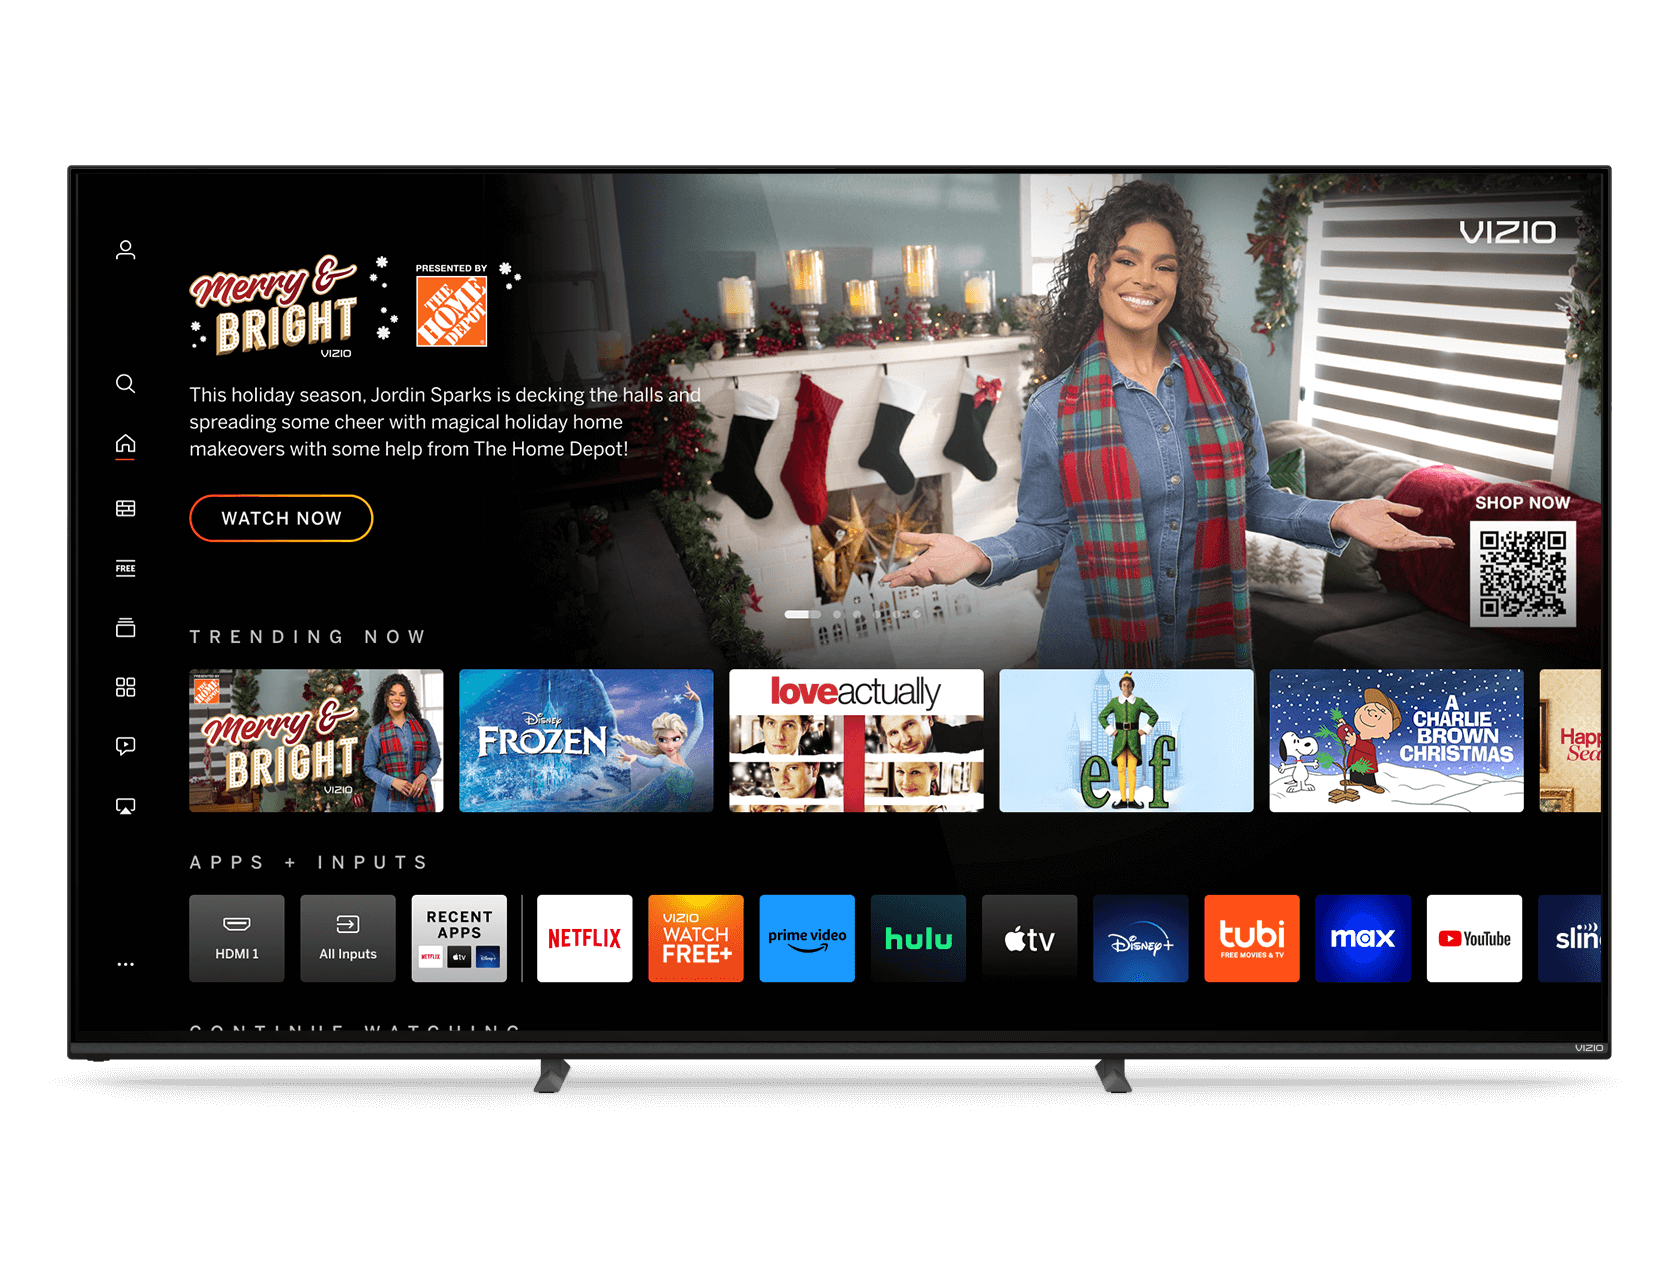 The Home Depot, launches ‘Merry & Bright’ shoppable content series on Vizio